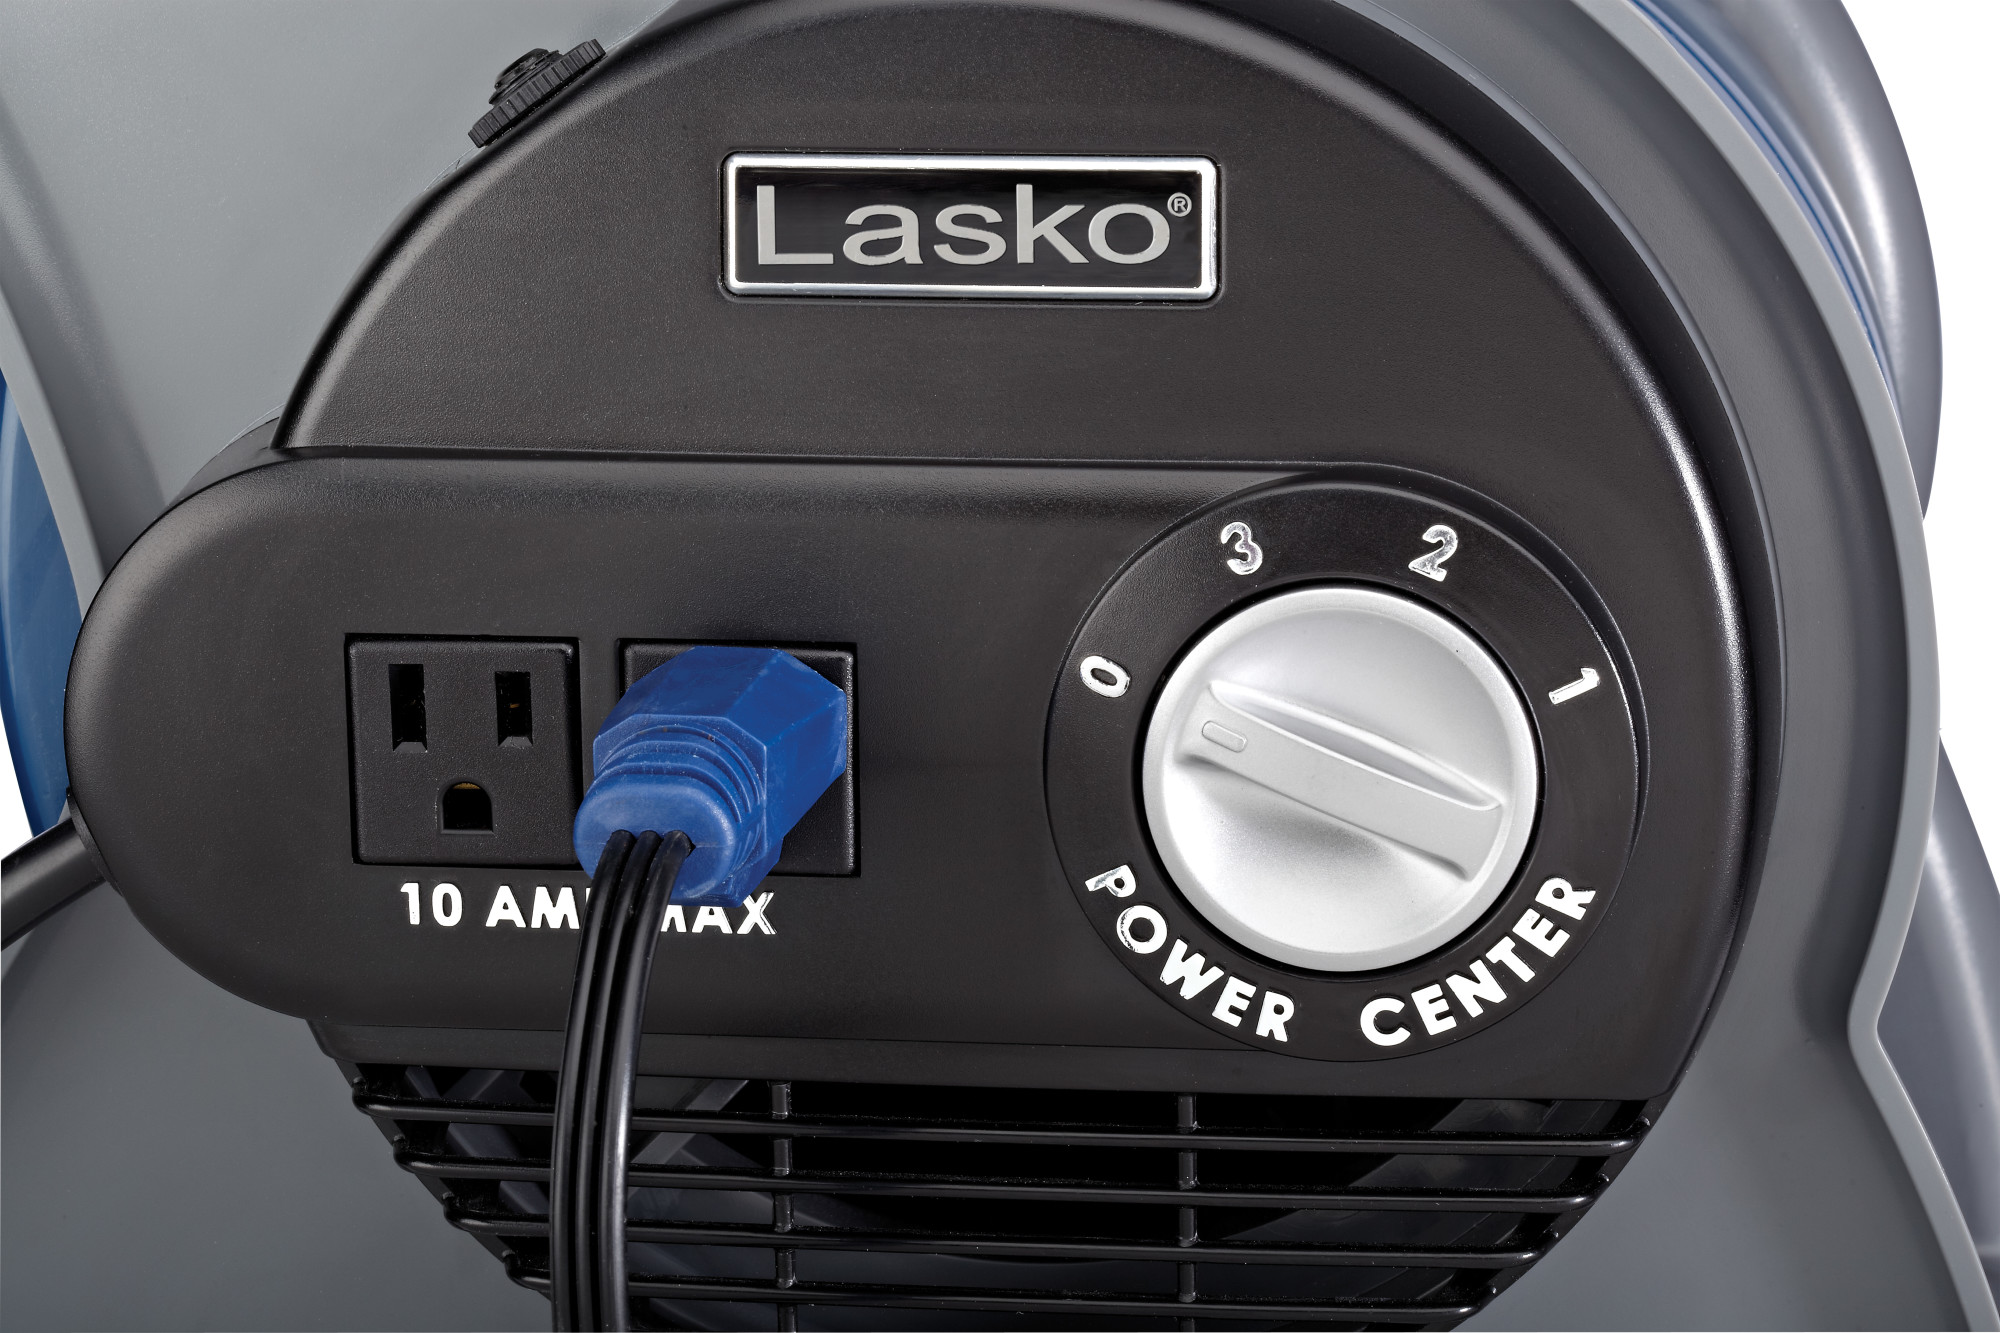 Lasko 11" 3-Speed Multi-Purpose Pivoting Utility Blower Fan with Outlets, Blue, U12100, New - image 2 of 3